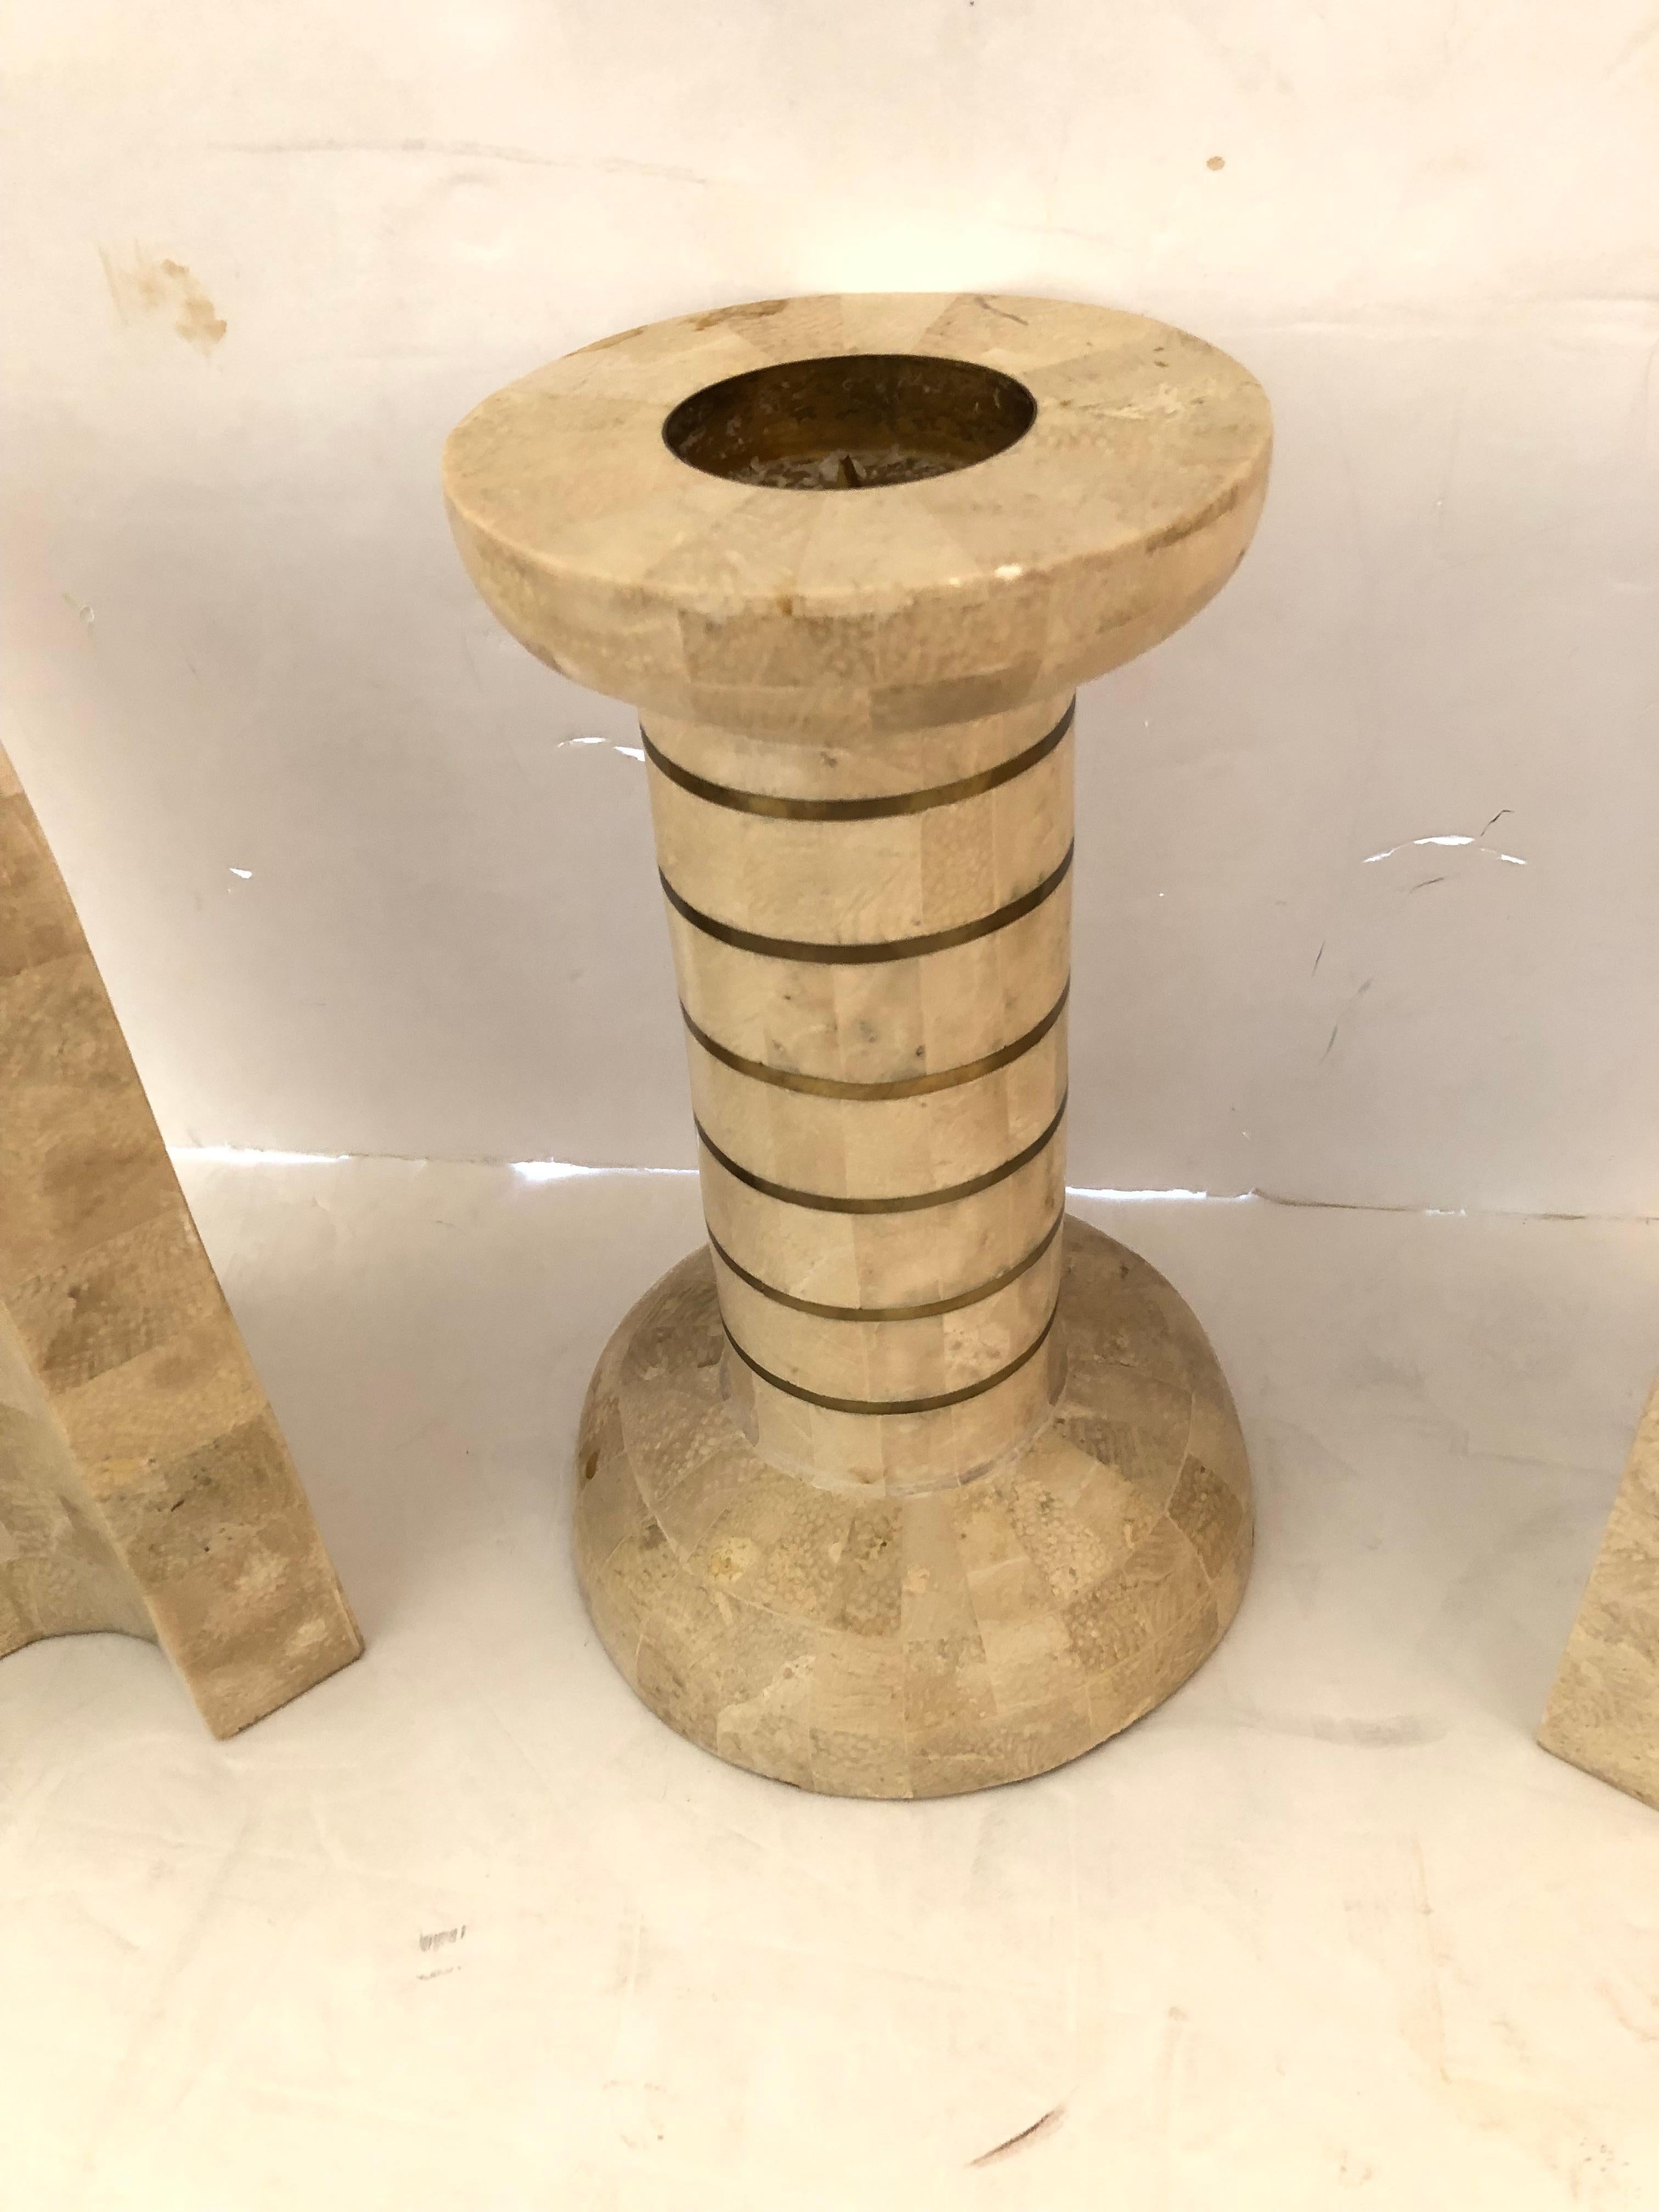 Chic mid-century set of bookends and matching chunky candlestick beautifully made of tessellated stone. Makes a stylish accessory set.
Candlestick 9.25 h 4.5 round at top; 5.75 round base
Bookends  5 w 4.5 d 9 h each